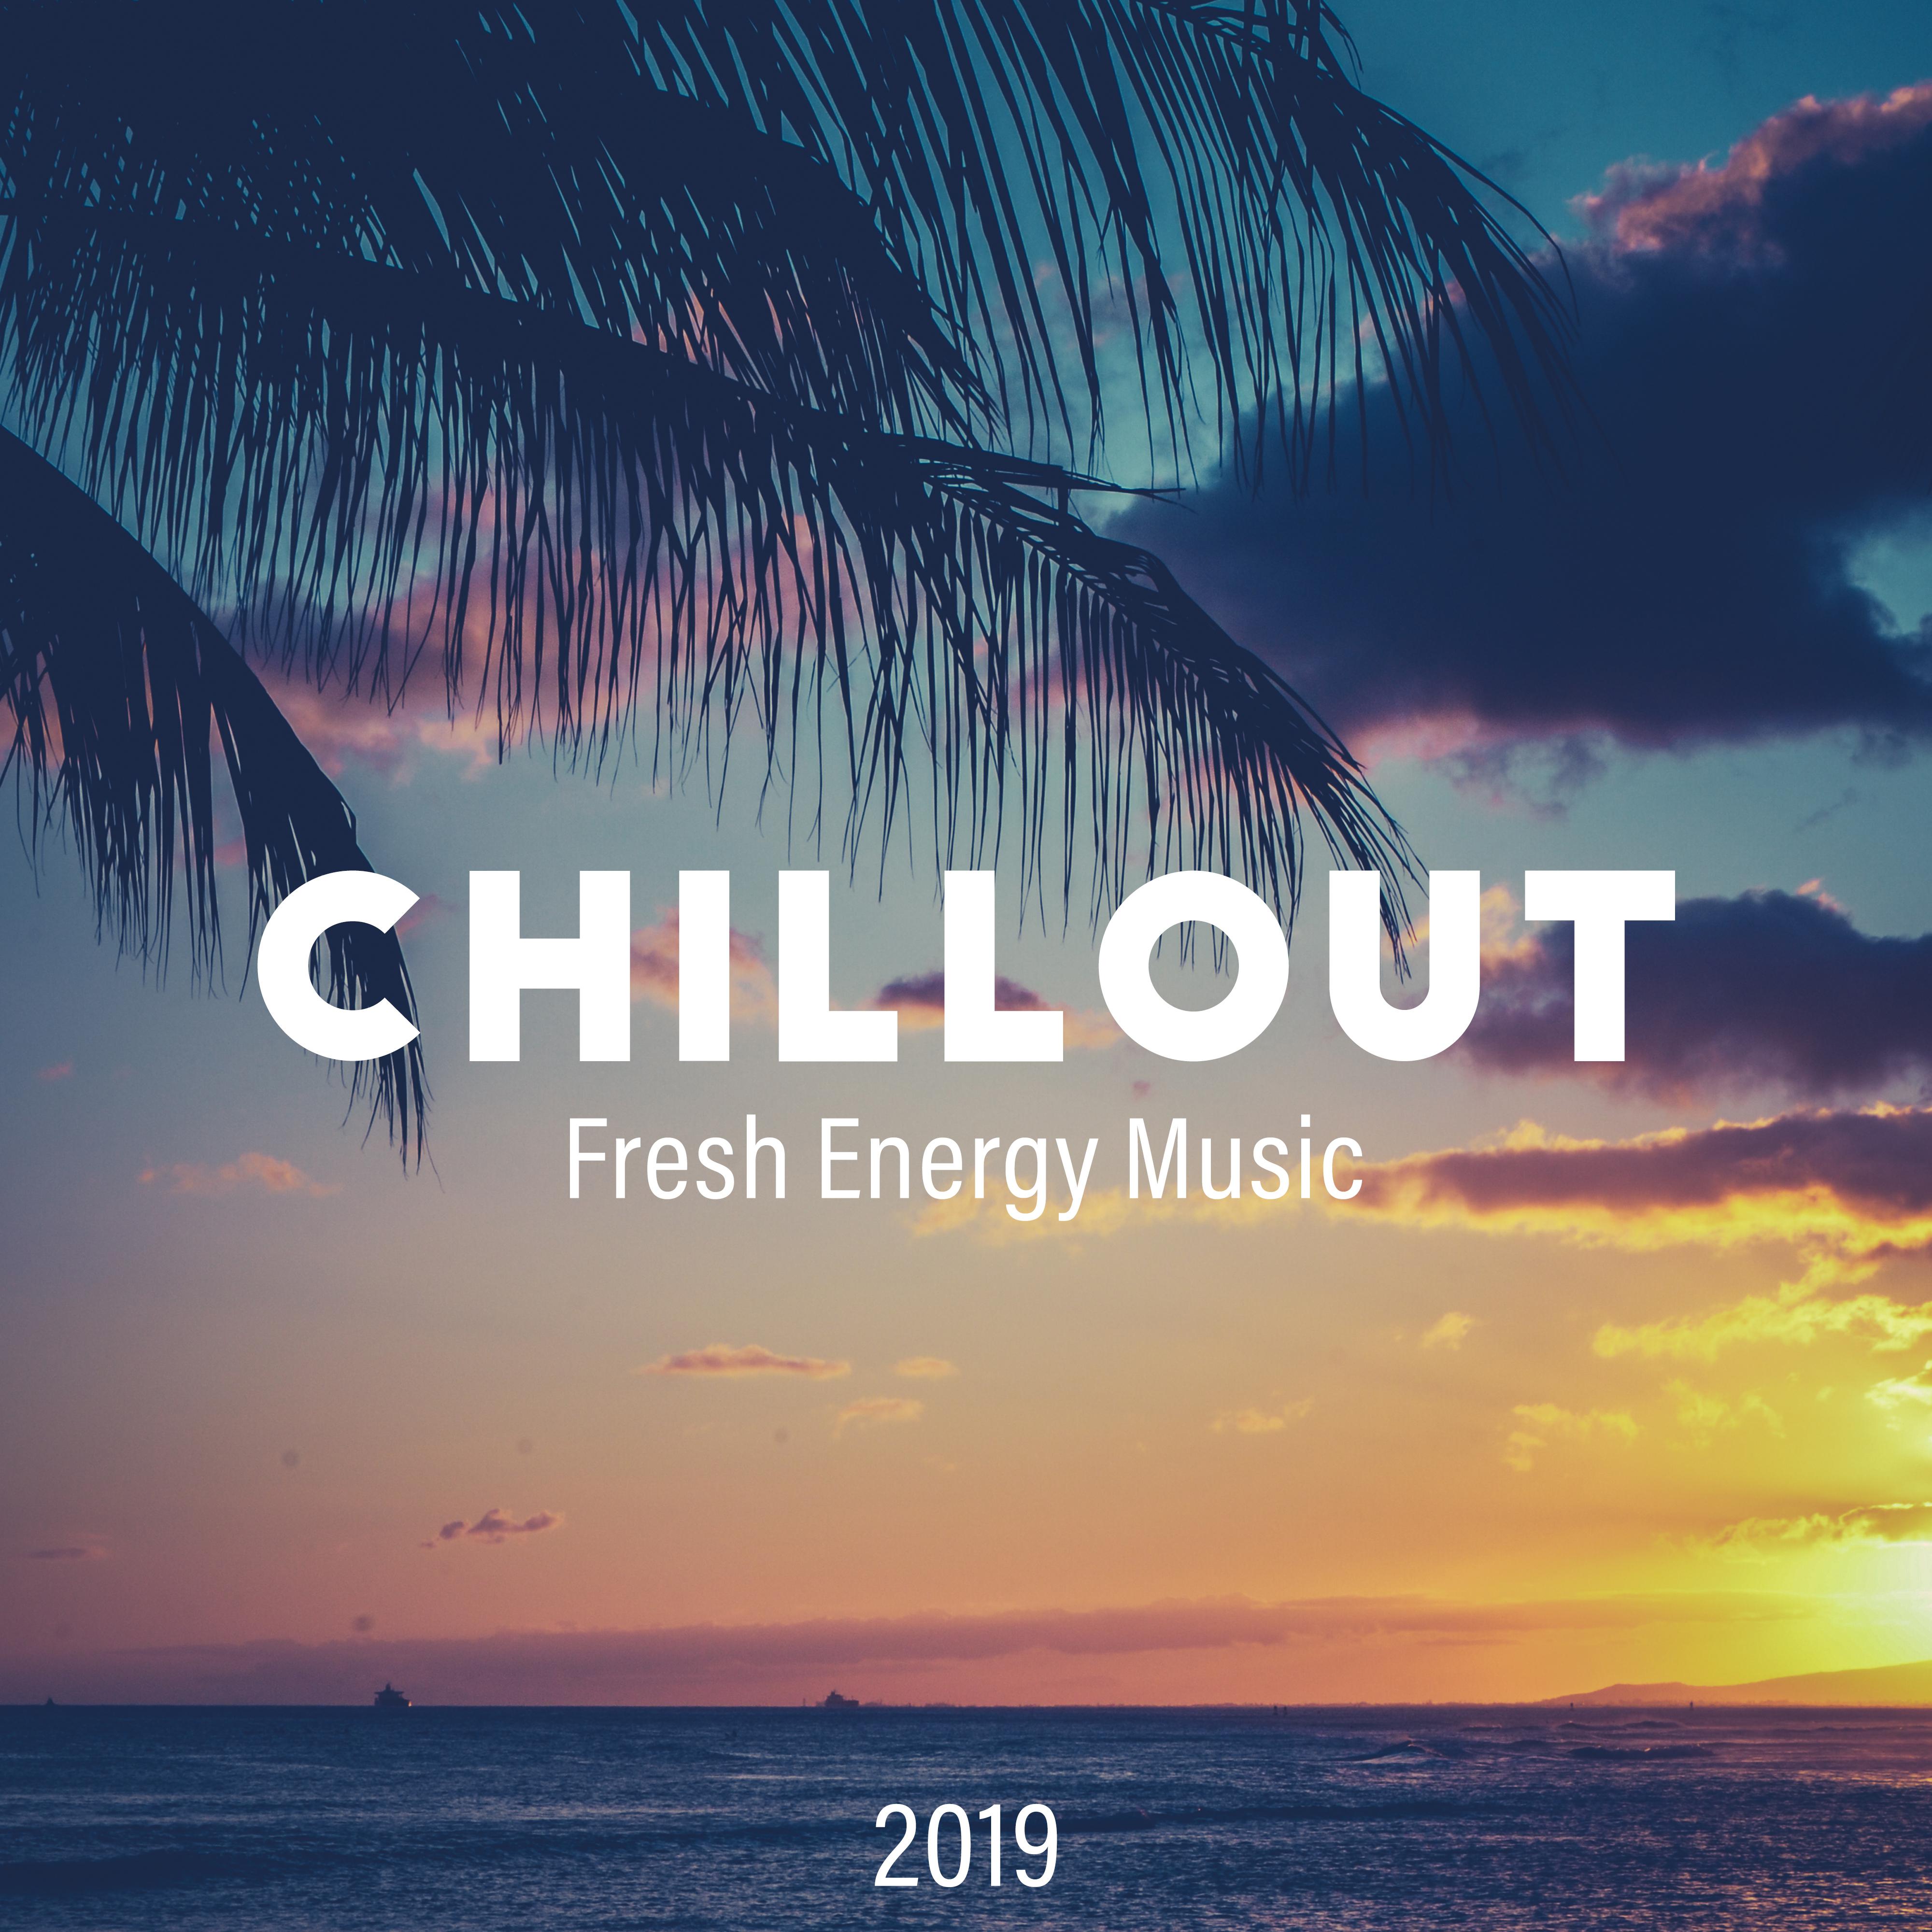 2019 Chillout Fresh Energy Music